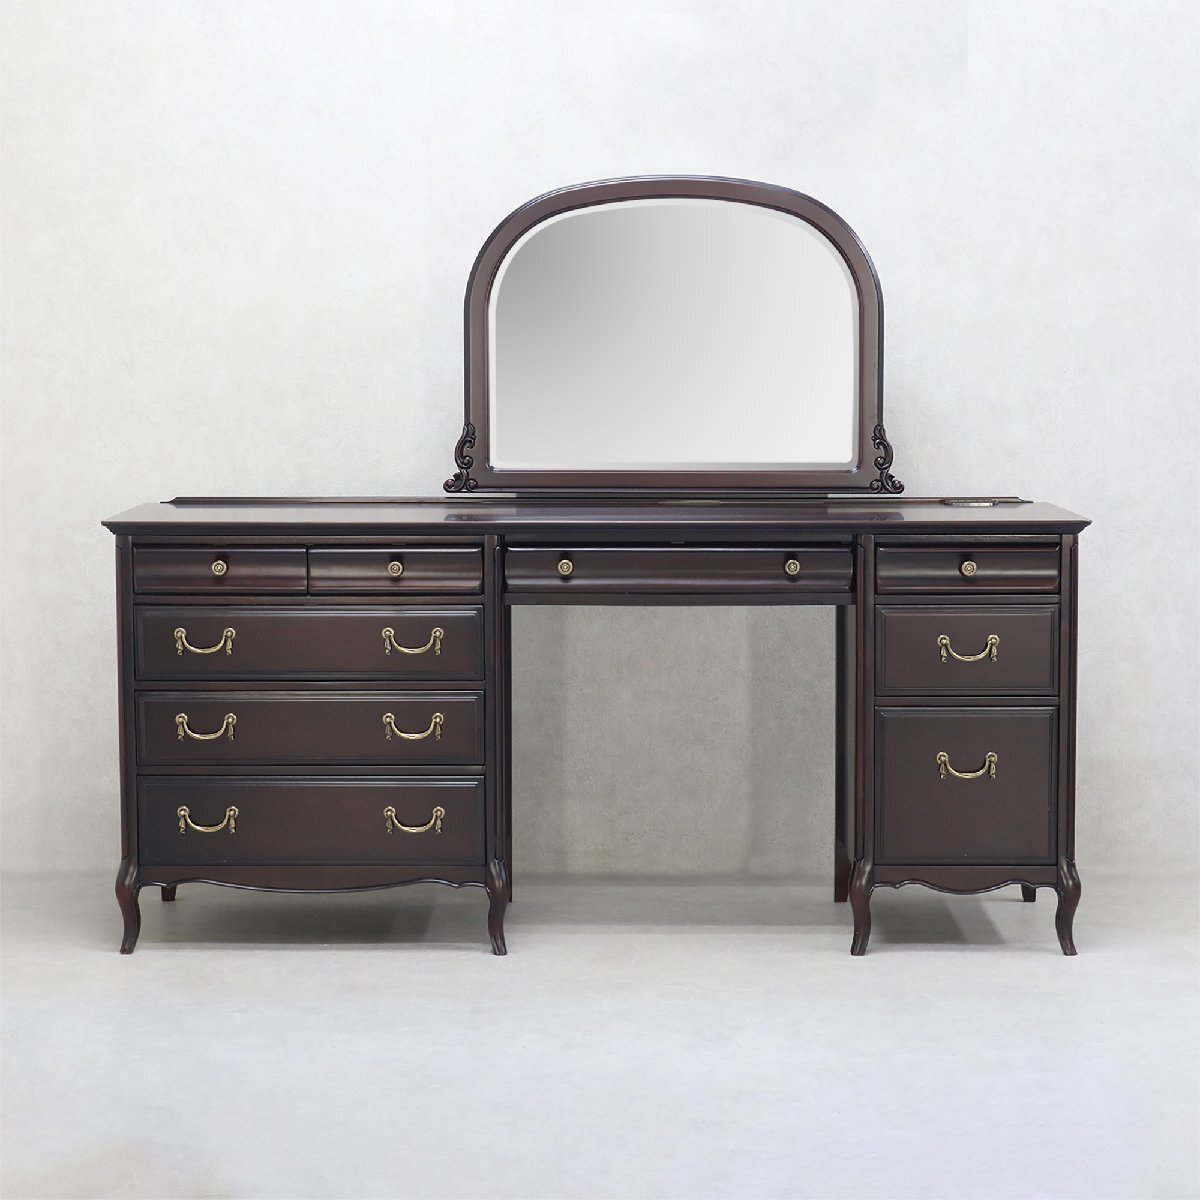 TOKAI KAGU/ Tokai furniture industry MilanaD mirror naD dresser desk 160 3 point set ( desk 160* mirror * stool ) Manufacturers direct delivery commodity installation included 